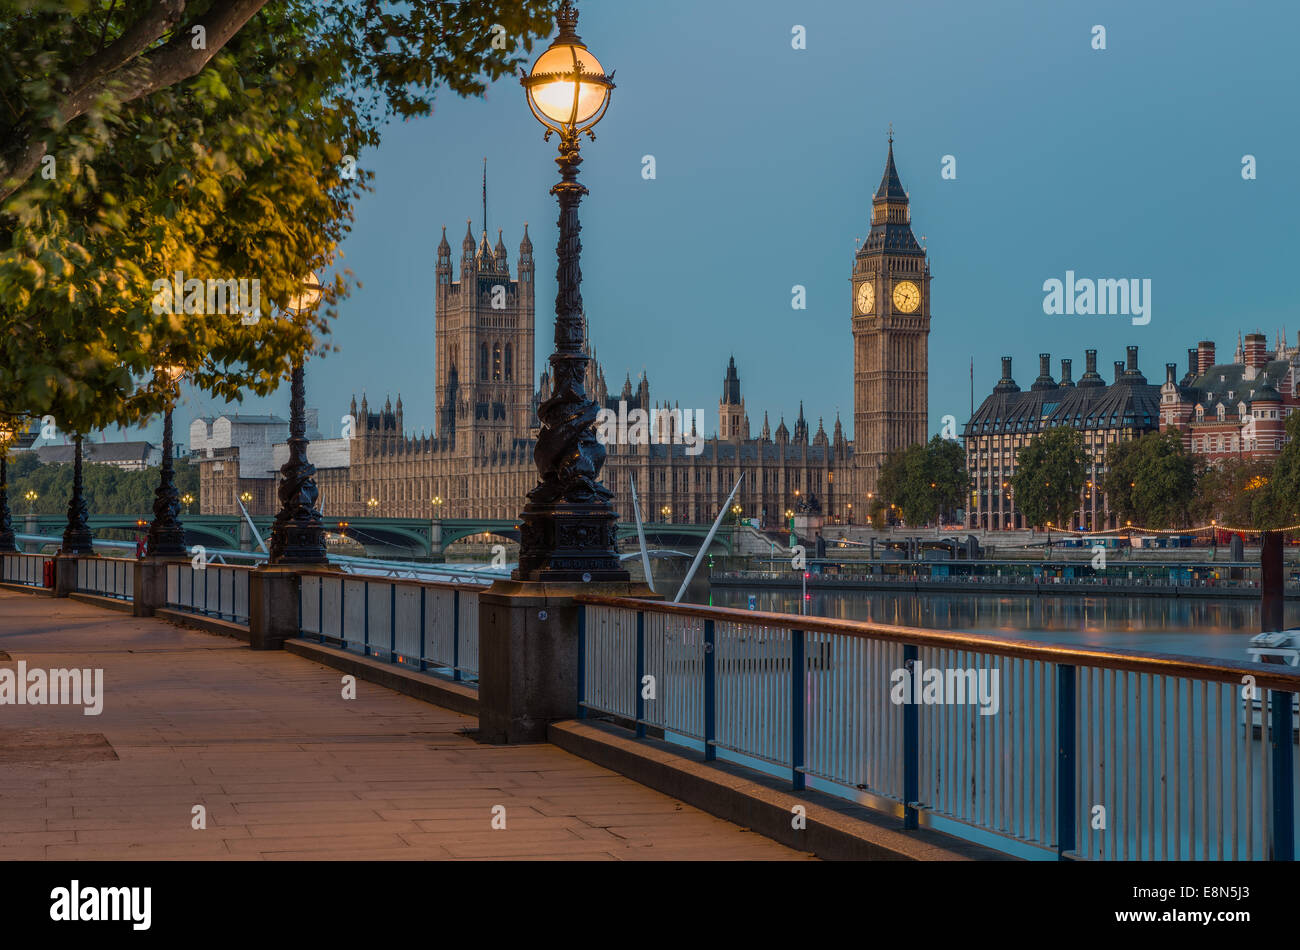 Lamp on South Bank of River Thames with Big Ben and Palace of Westminster in Background, London, England, UK Stock Photo